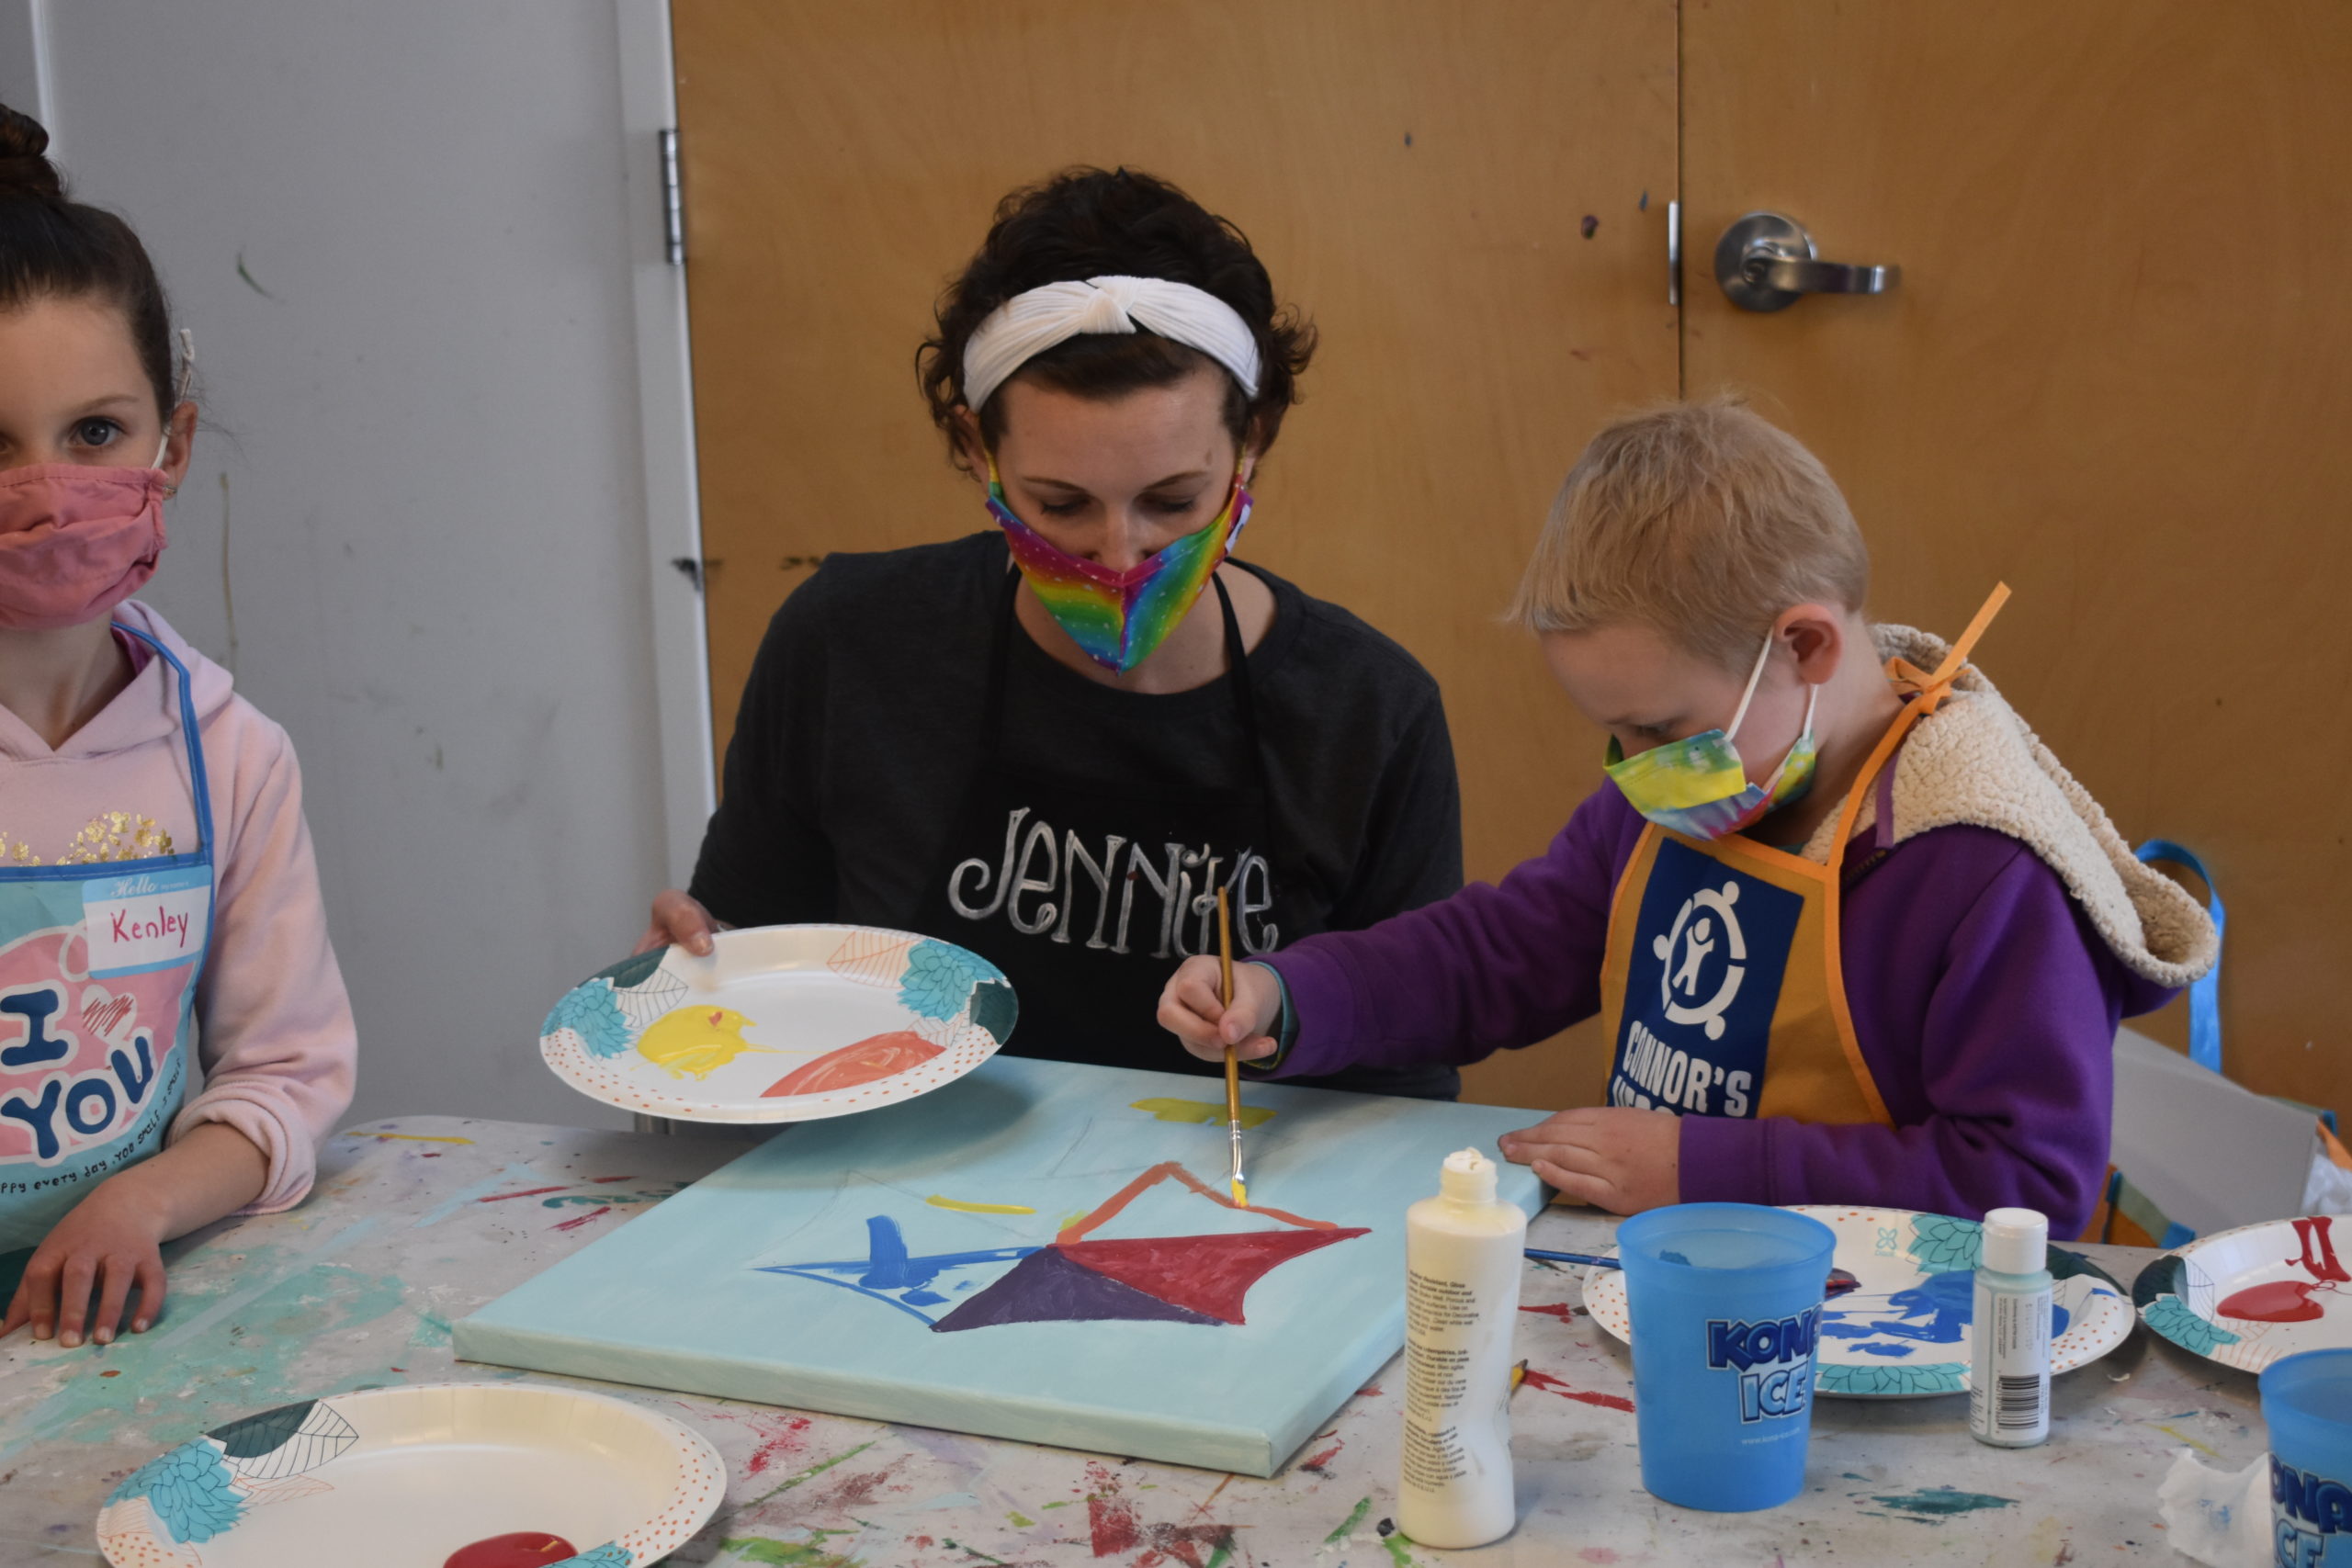 A child in an art studio painting on a canvas with an adult helping her